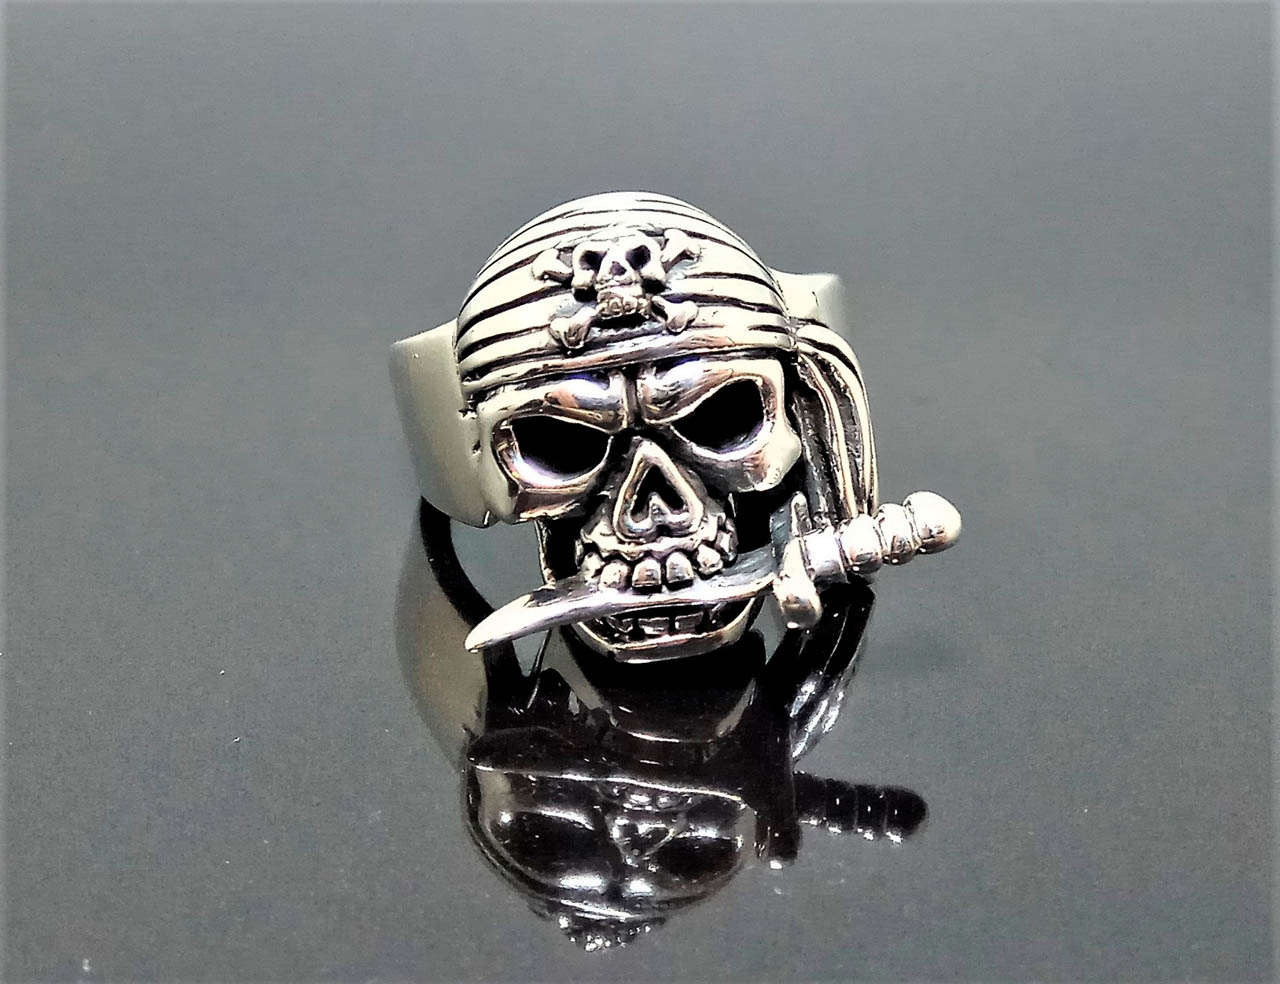 Jewelry Pirate Heavy 18 Knife Design 925 Grams Silver Gems and with ELIZ Exclusive Ring - Sterling Biker rocker Skull Pirate goth